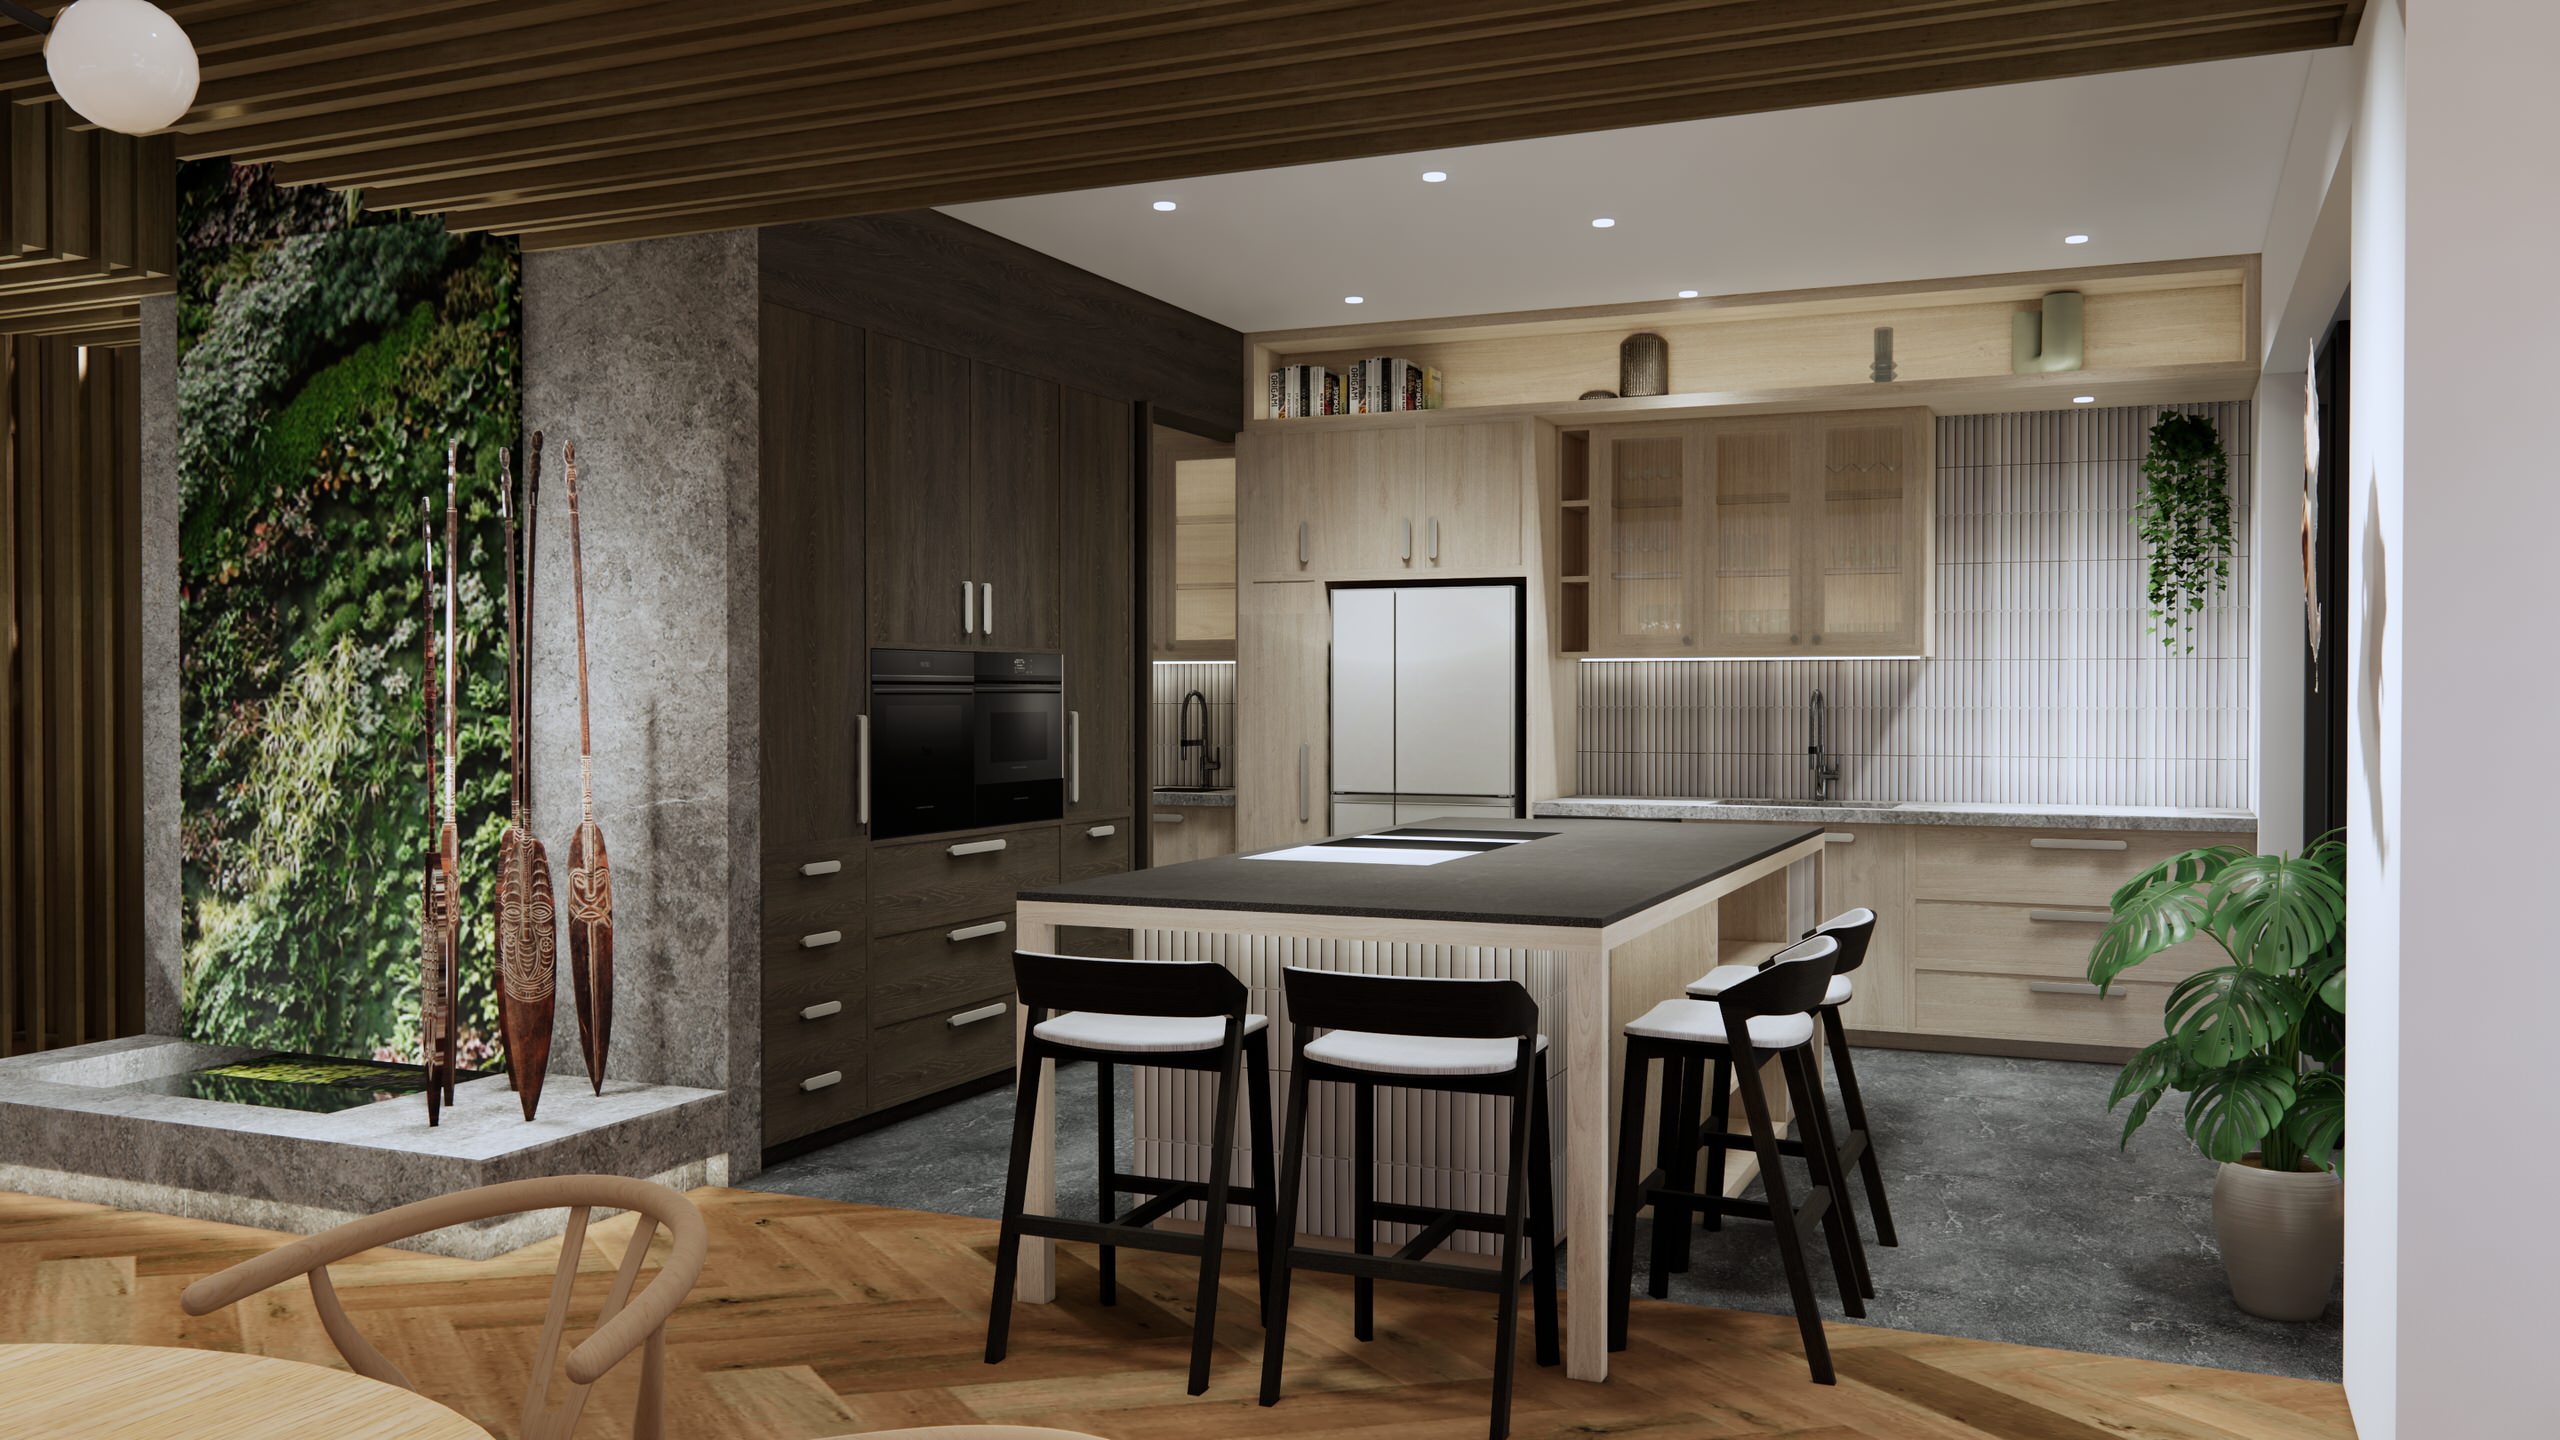 Concept Render for the kitchen featuring open plan design with a large island bench, walk-through butler's pantry and direct access to outdoor BBQ area.